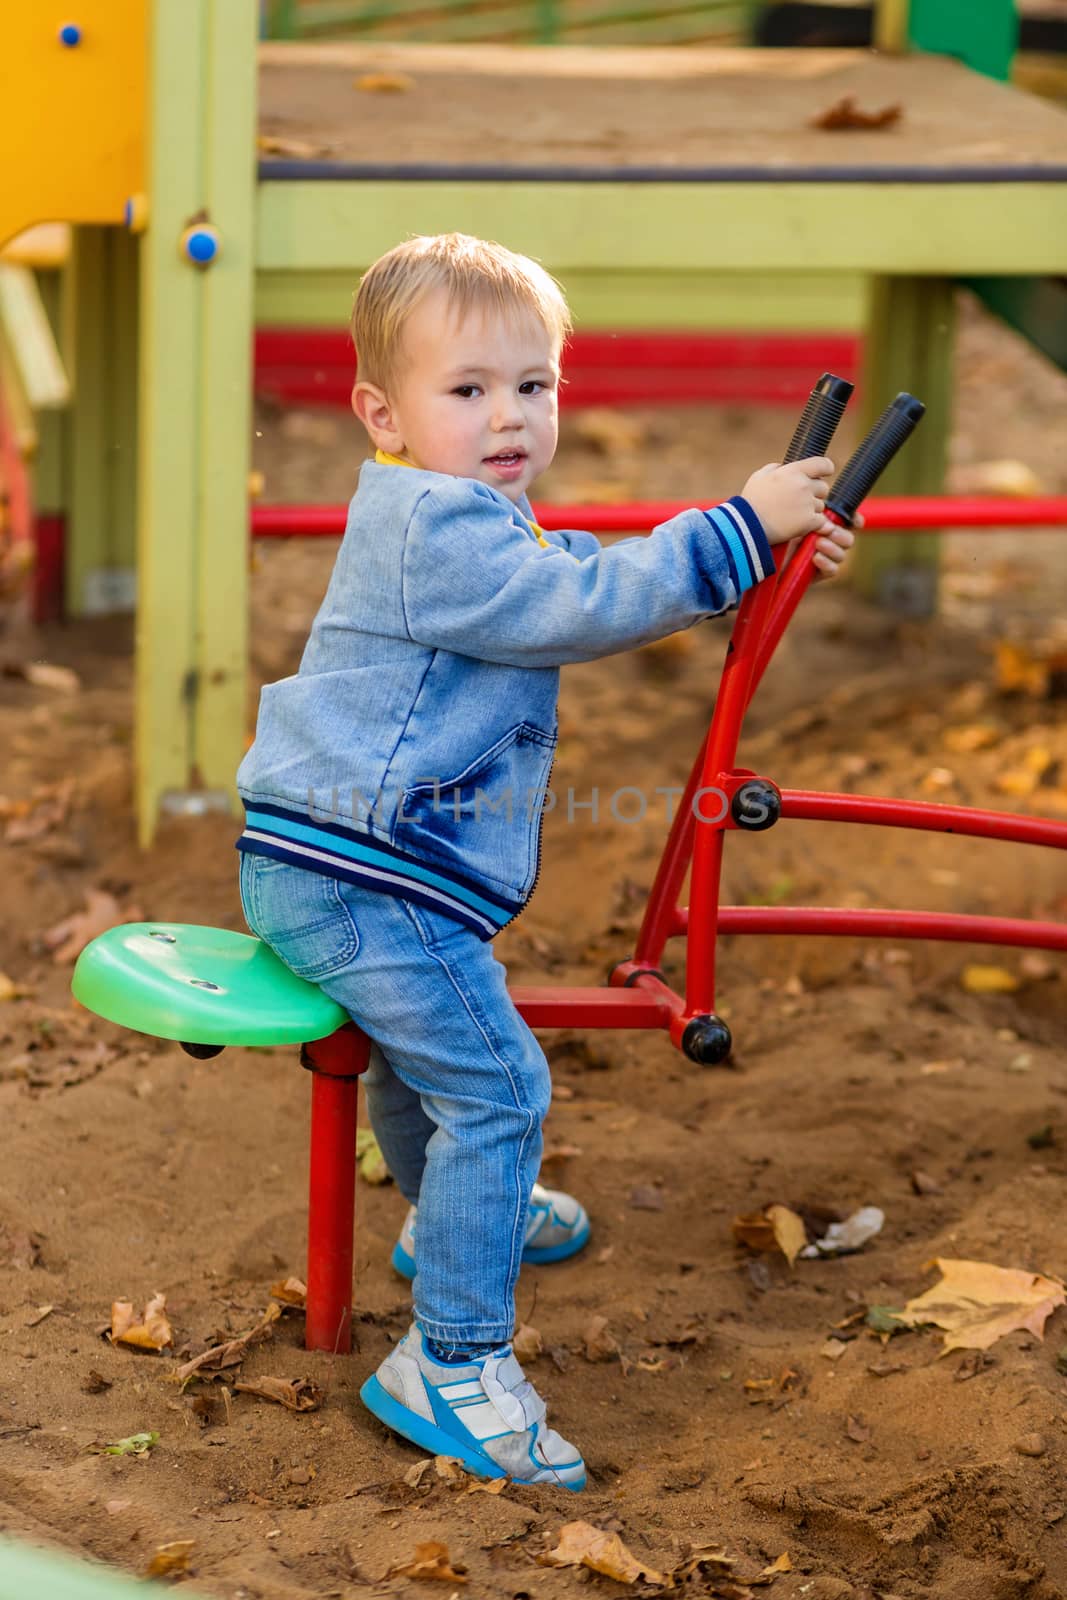 Little boy plays with a toy excavator on the playground in the autumn park. by galinasharapova